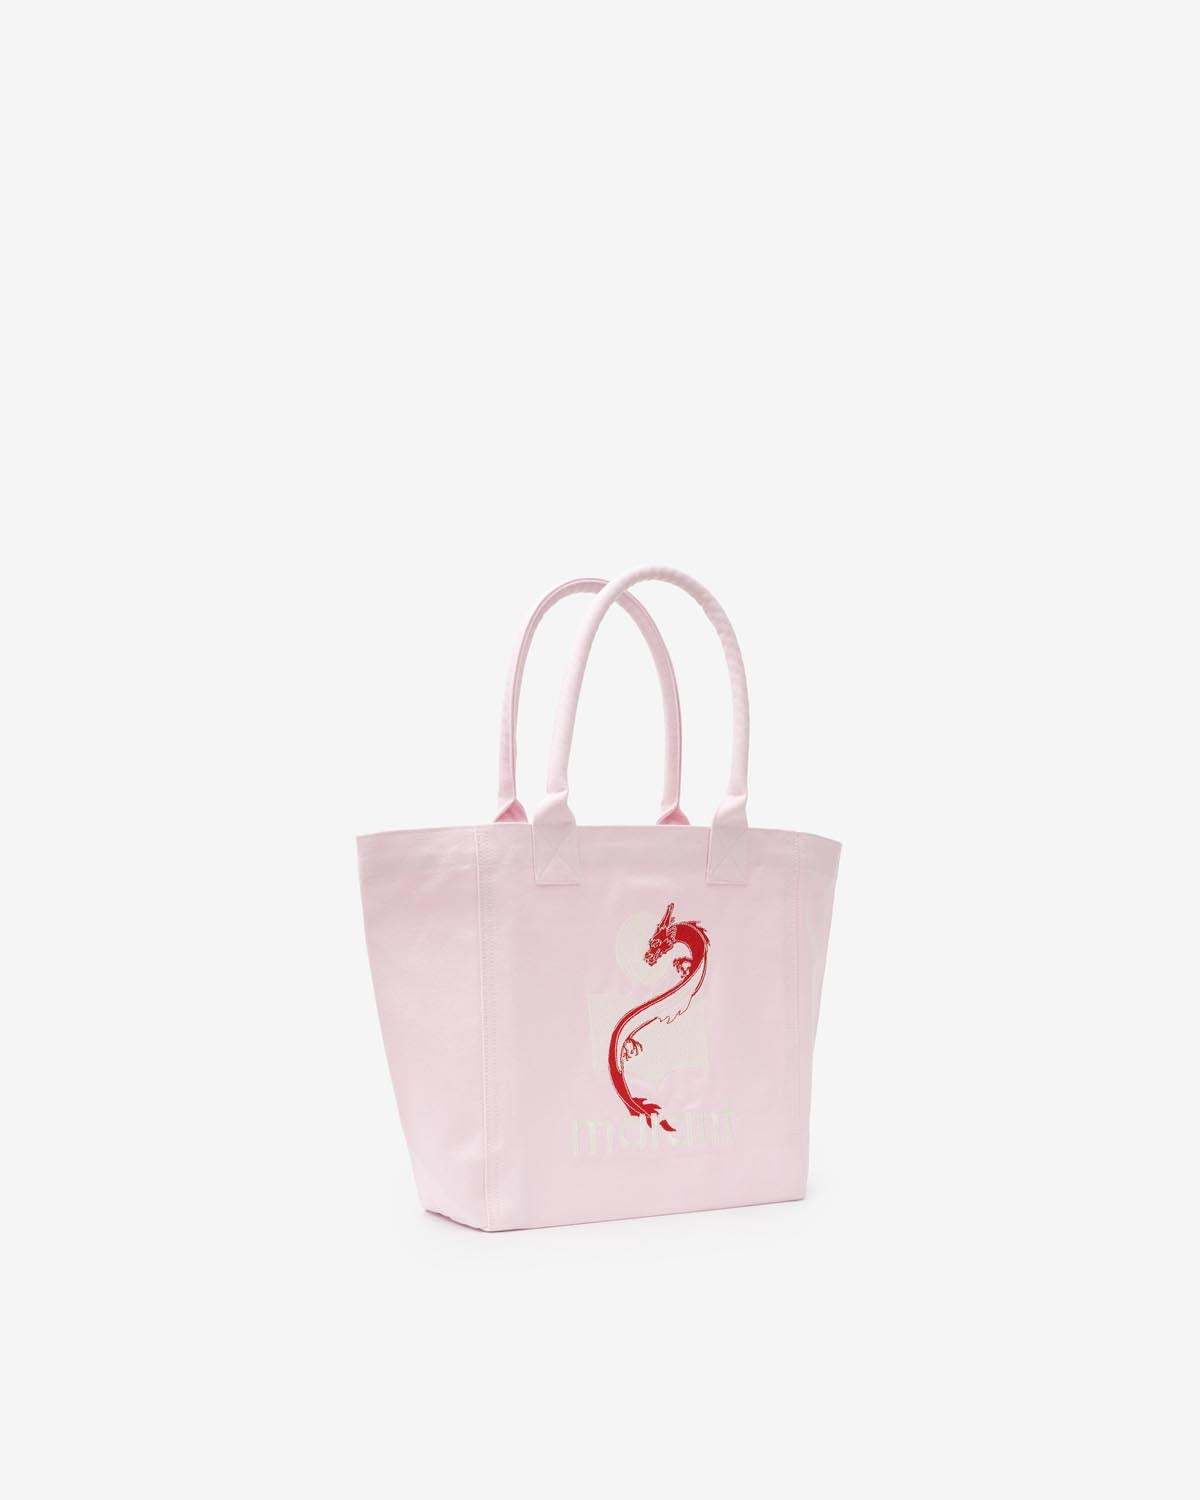 Tote bag yenky small Woman Rosa 1